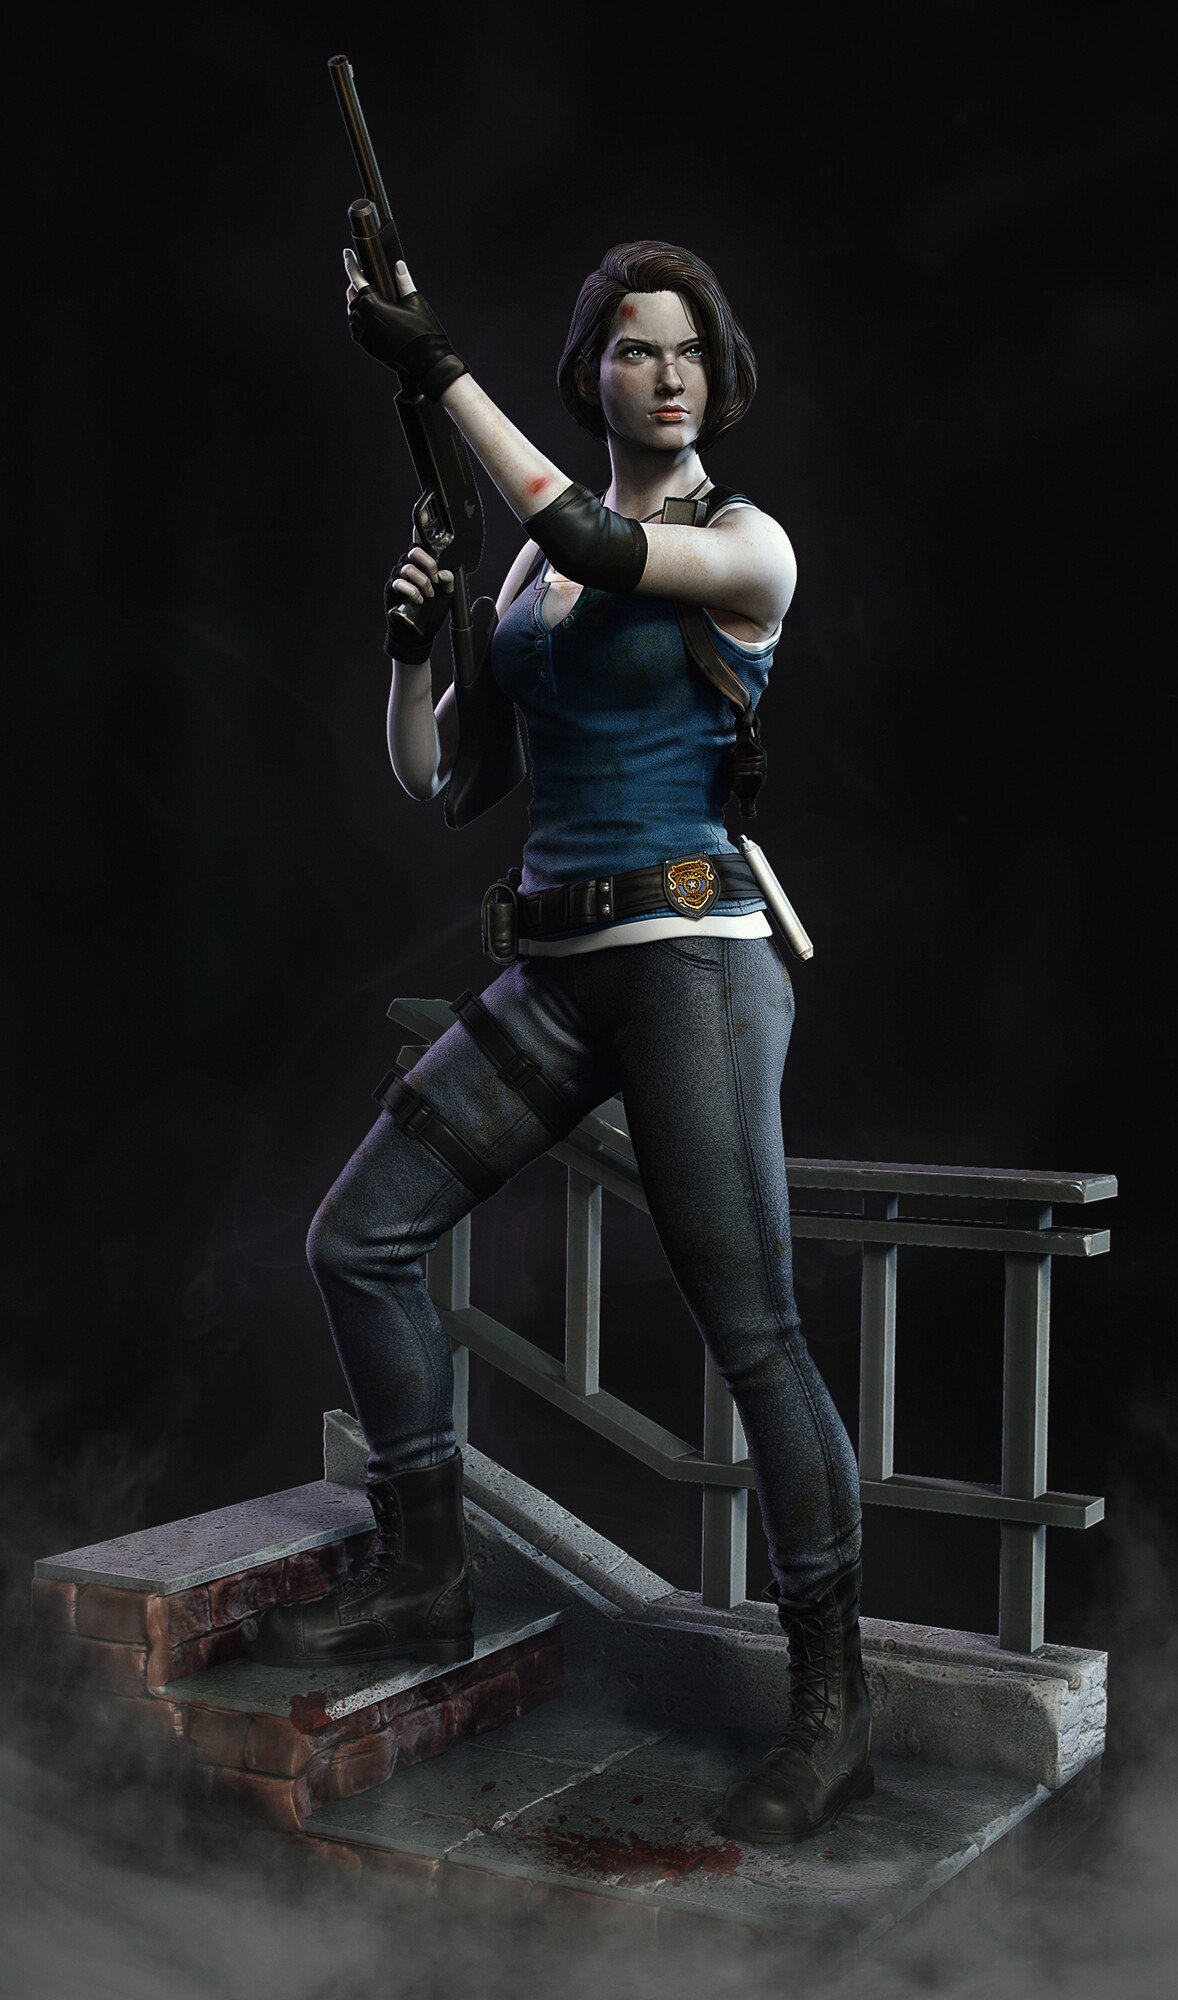 PC / Computer - Resident Evil 5 - Jill Valentine - The Models Resource